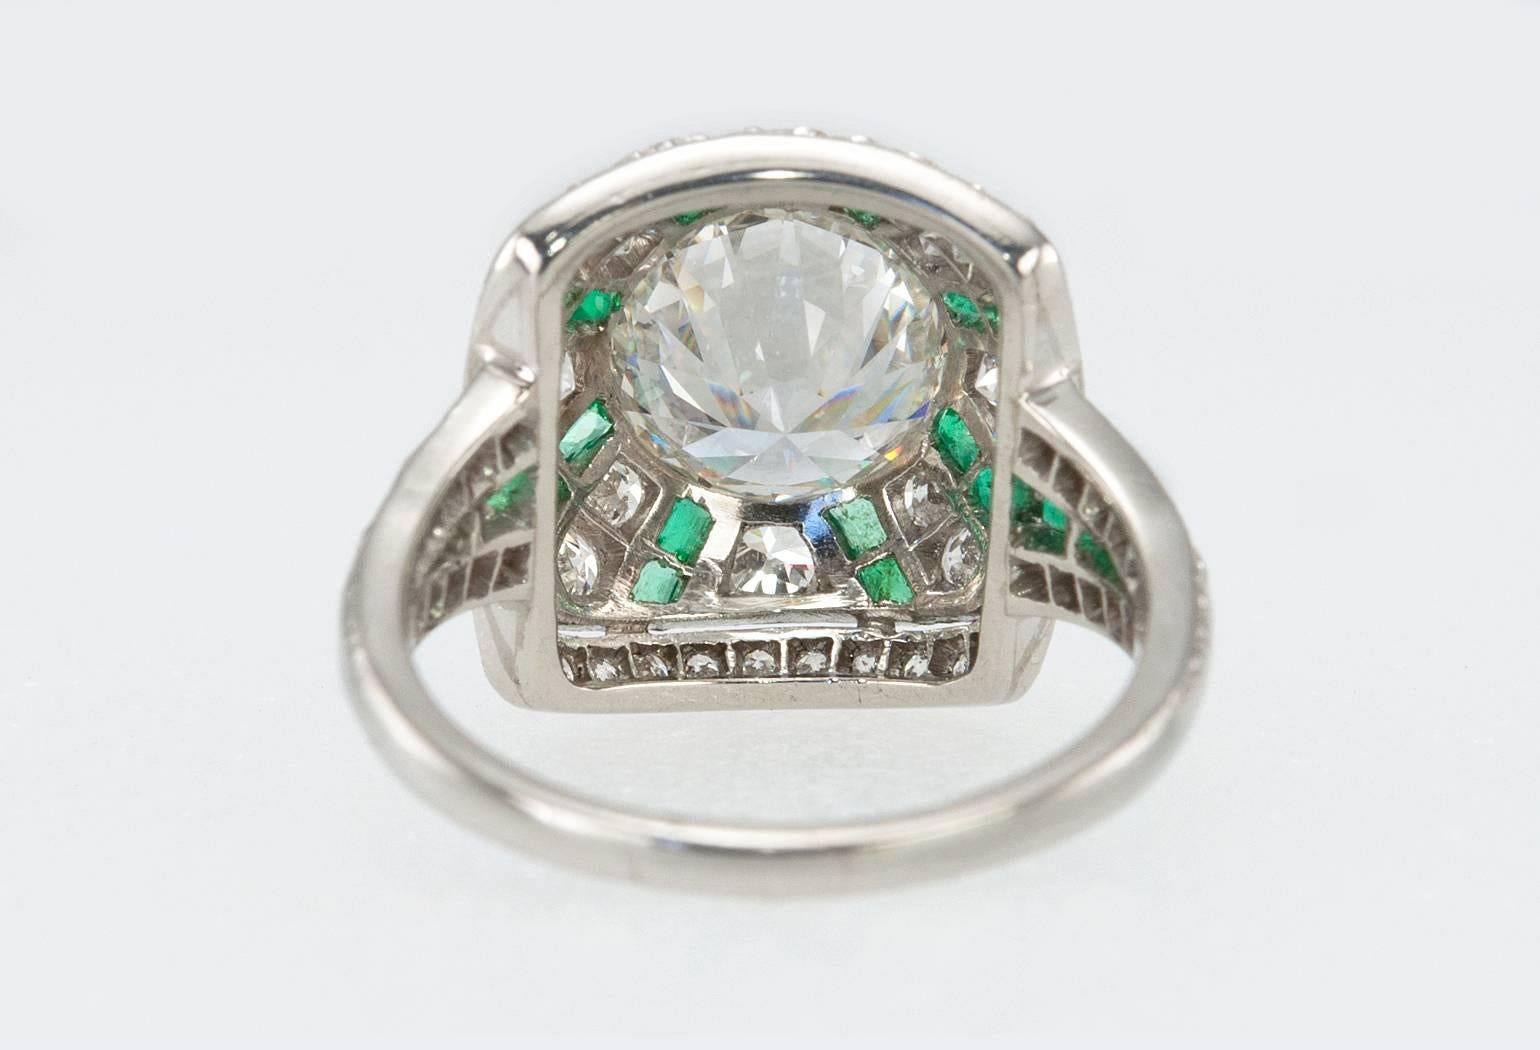 Tiffany & Co. Old European Cut Diamond  Emerald Ring  In Excellent Condition For Sale In Los Angeles, CA